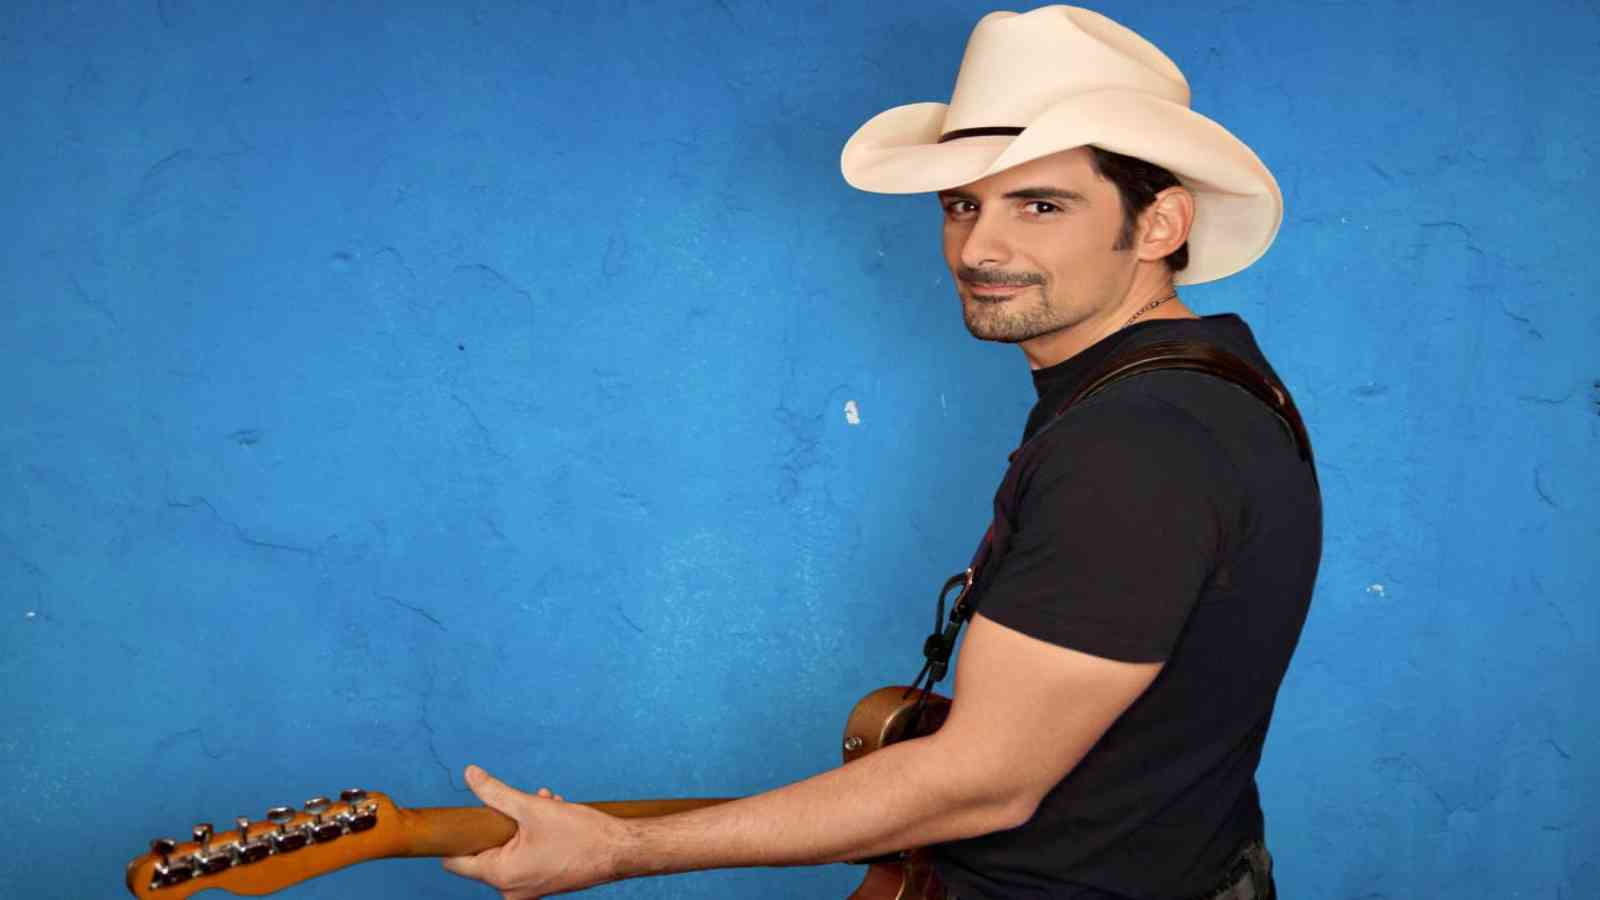 Brad Paisley Illness: What Disease Does He Have?